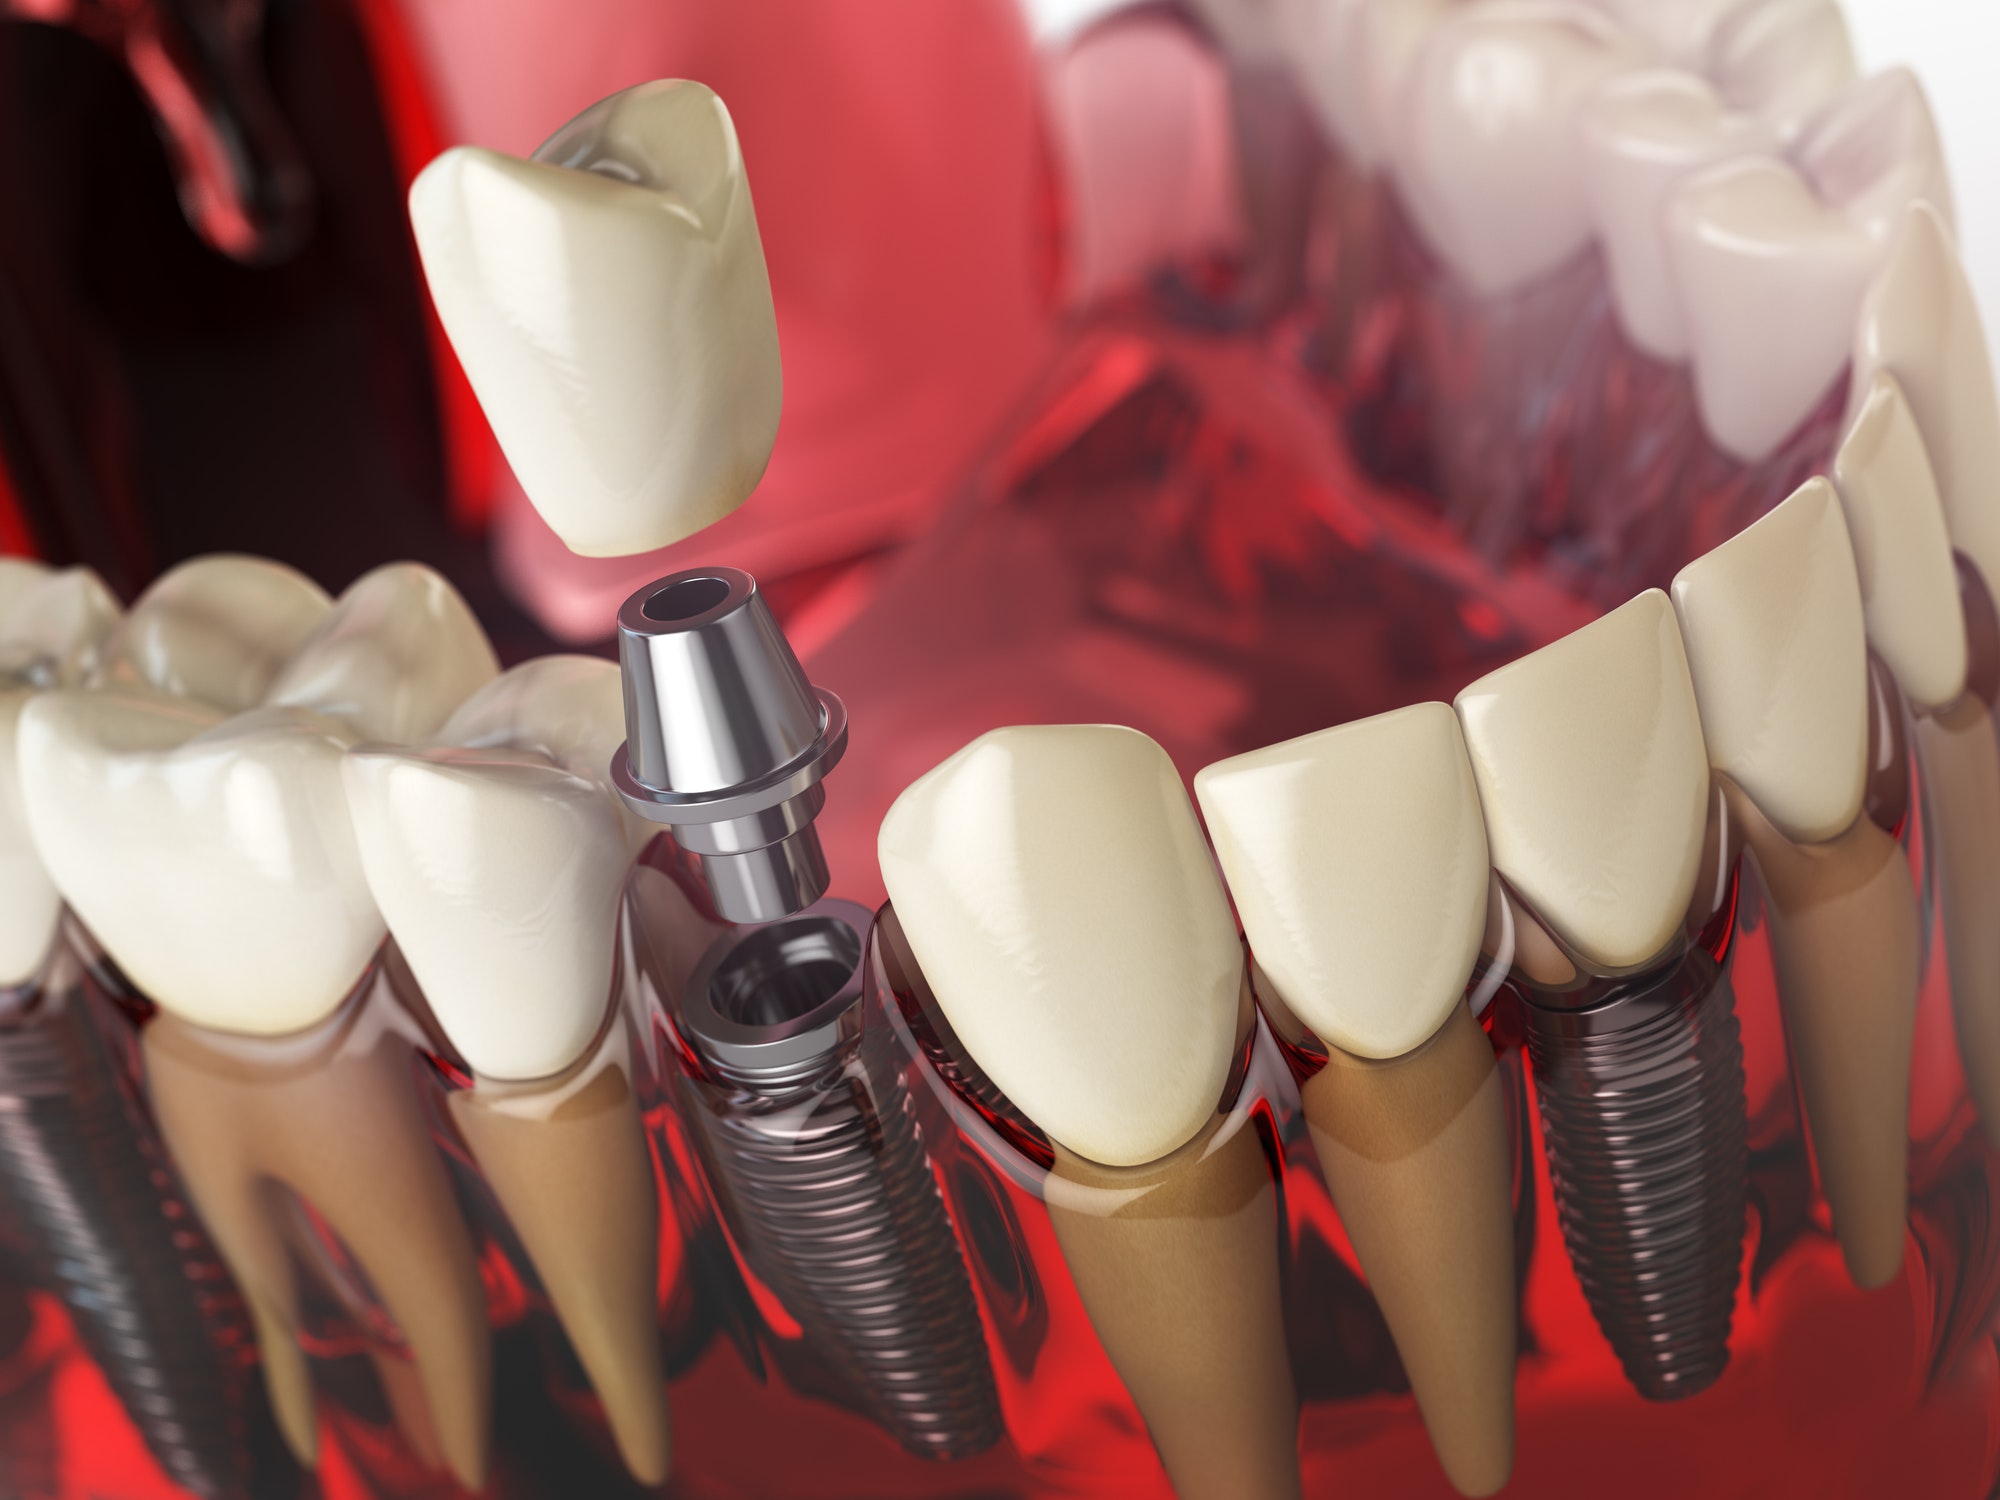 Tooth implant in the model human teeth, gums and denturas. Denta